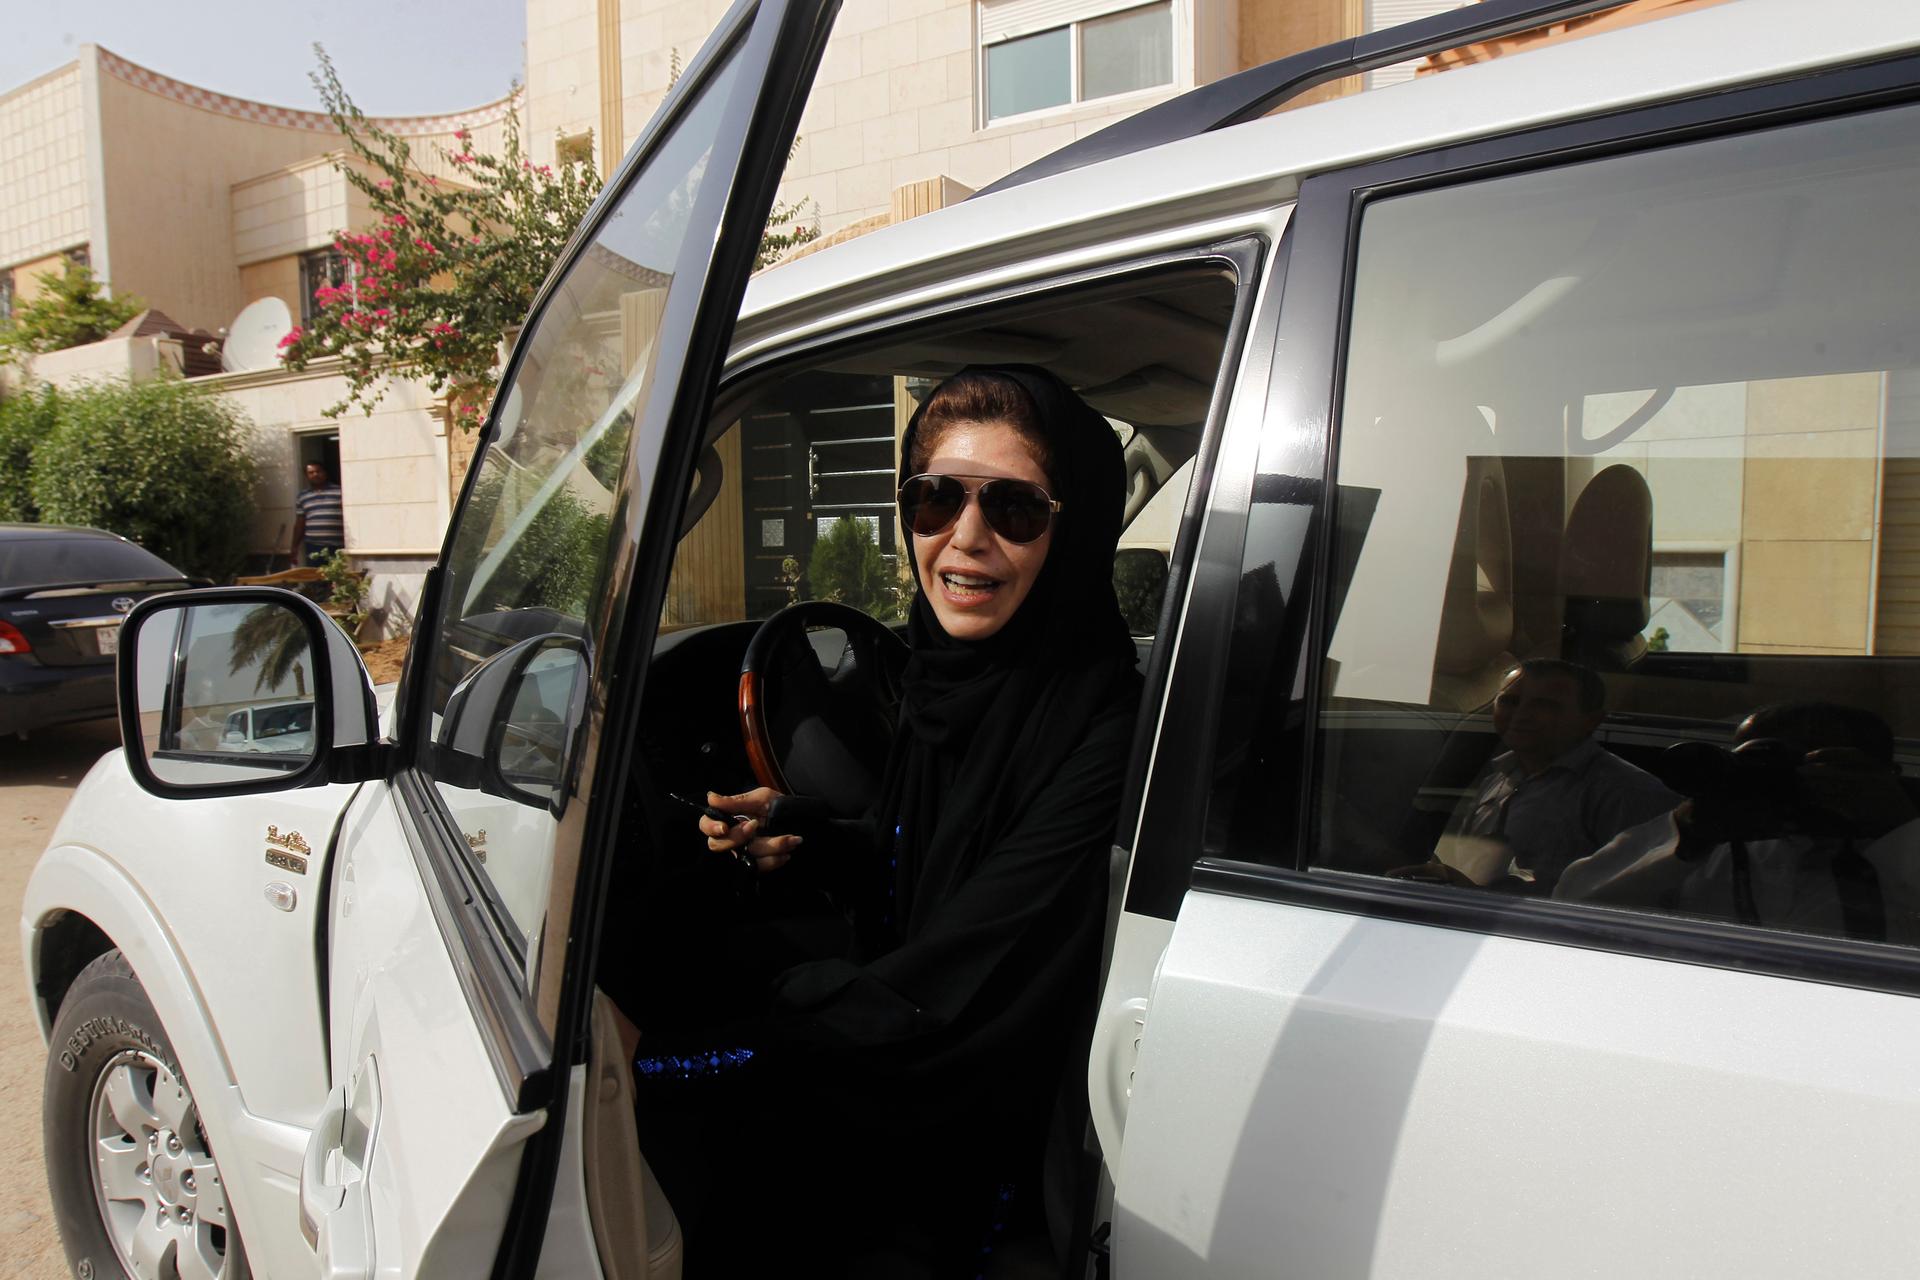 Female driver Azza Al Shmasani alights from her car after driving in defiance of the ban in Riyadh June 22, 2011.